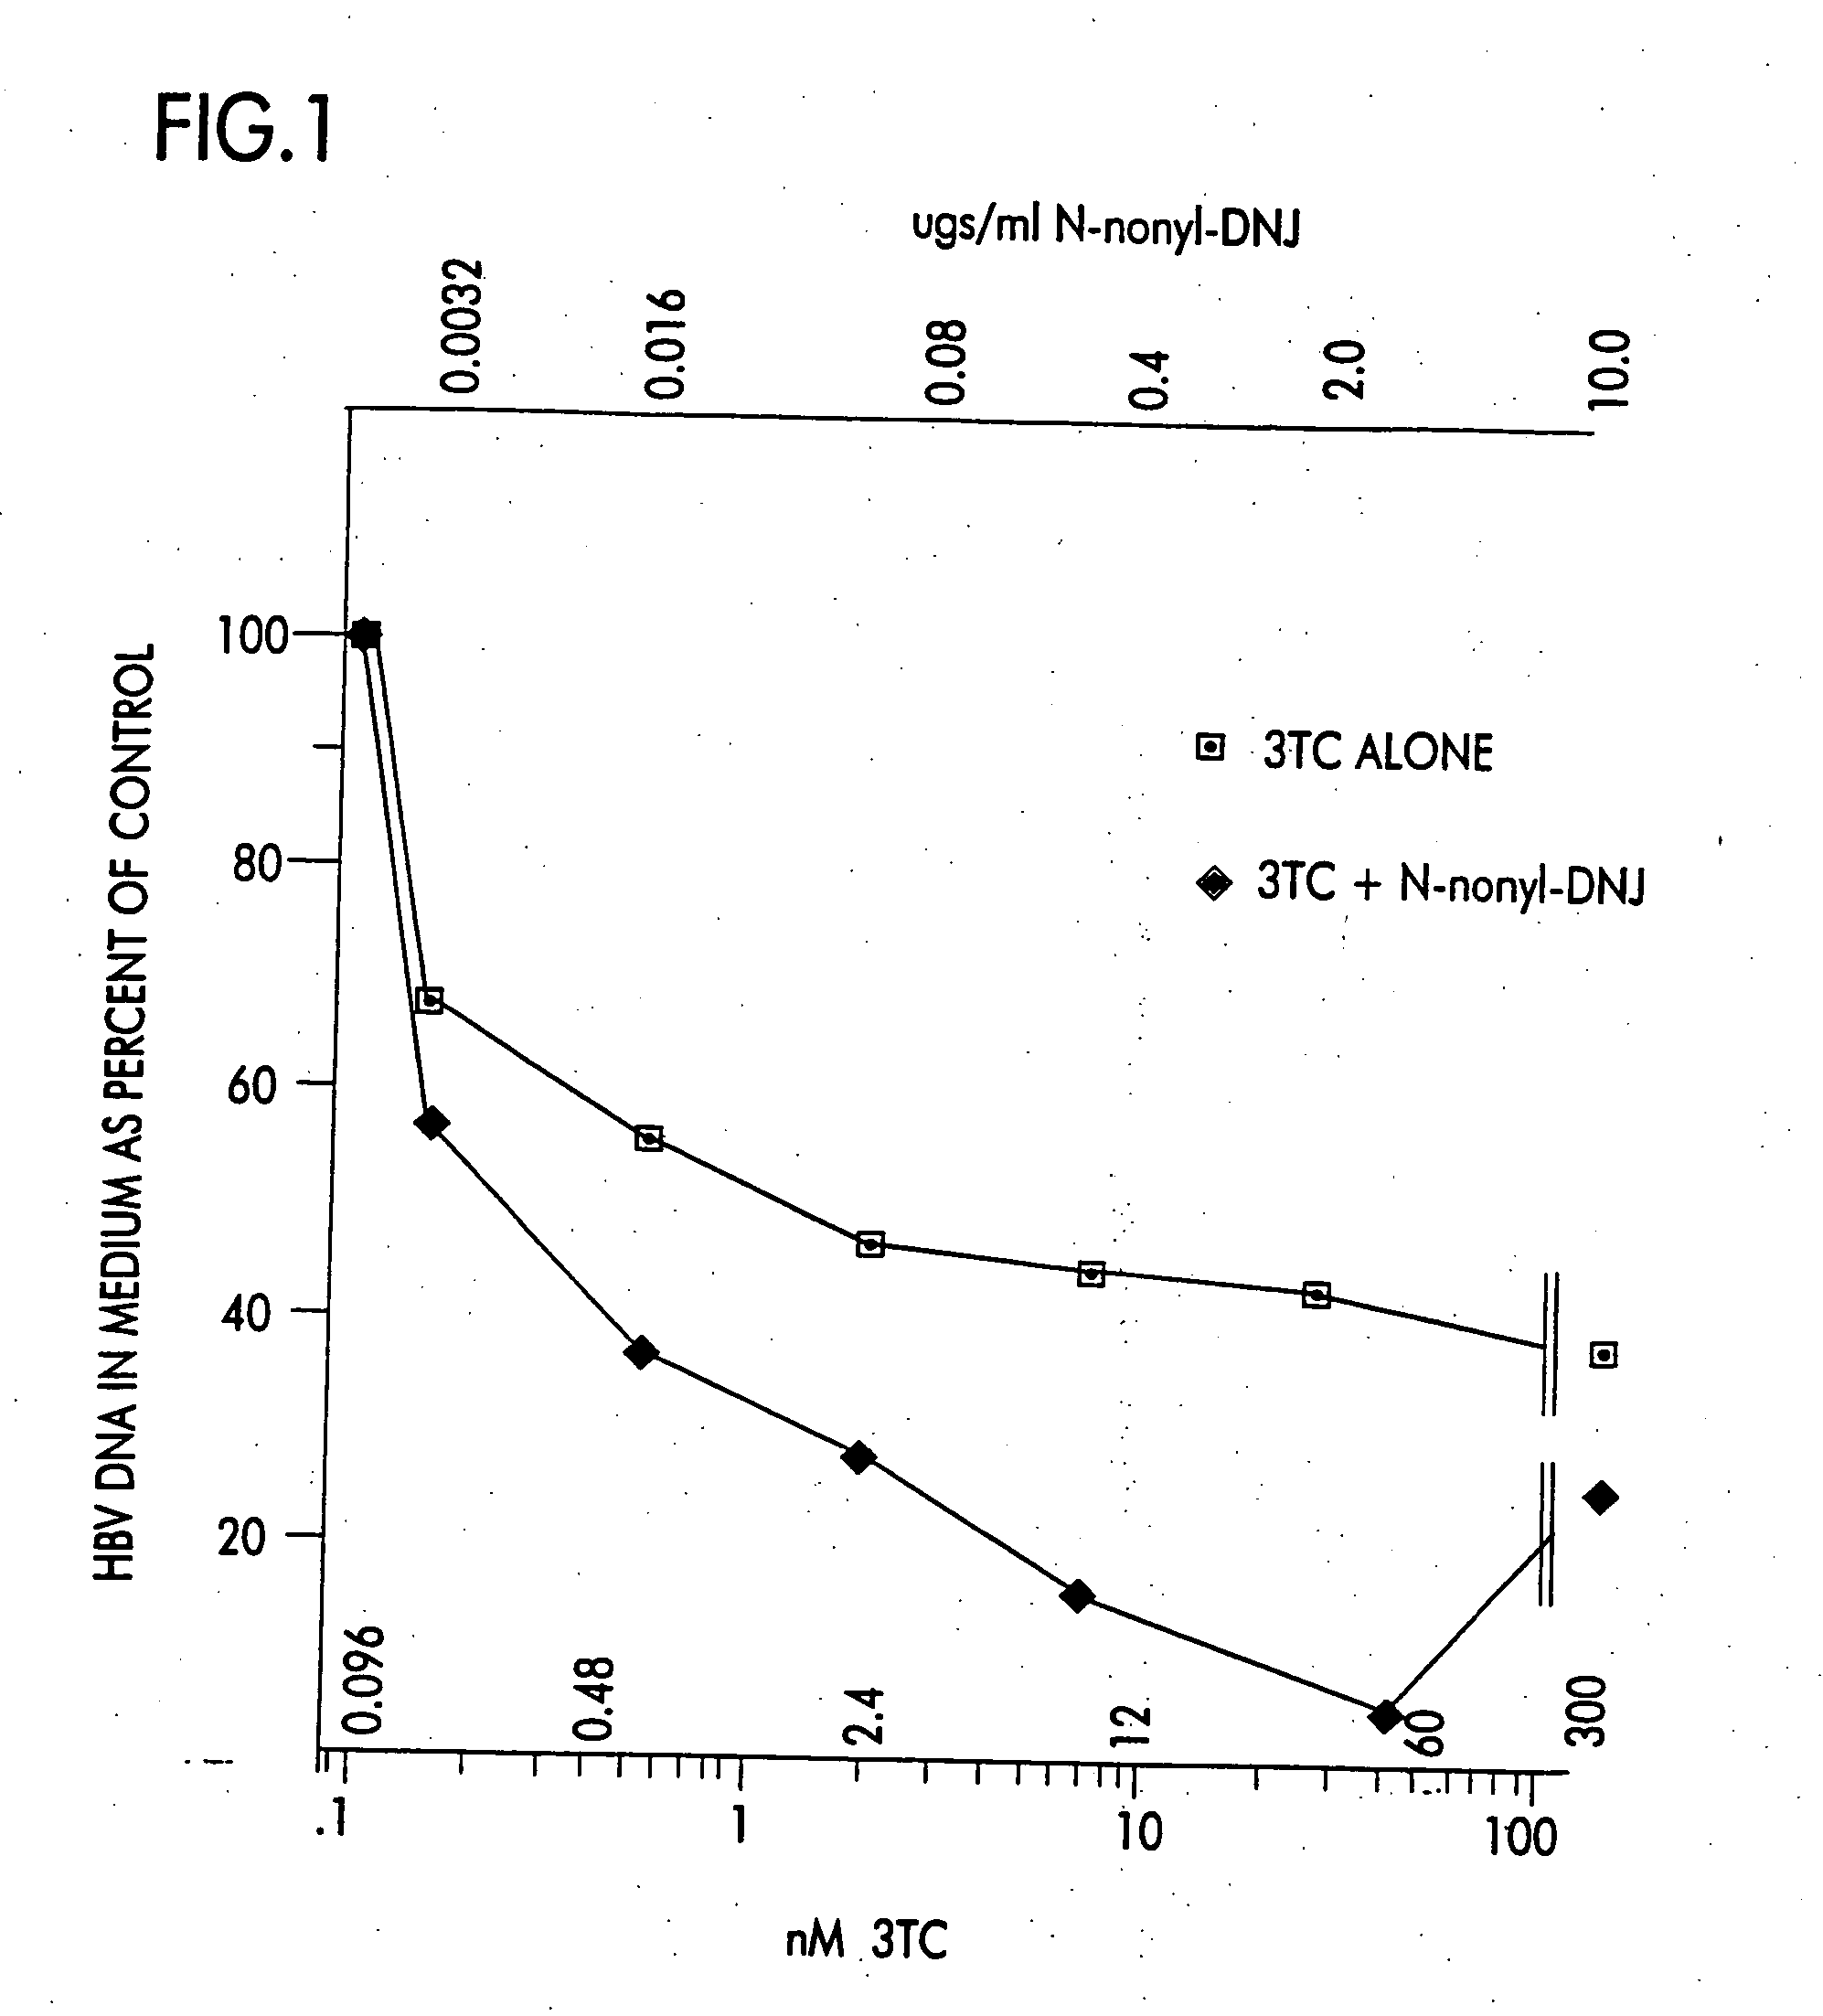 Methods of treating hepatitis virus infections with N-substituted-1,5-dideoxy-1,5-imino-D- glucuitol compounds in combination therapy